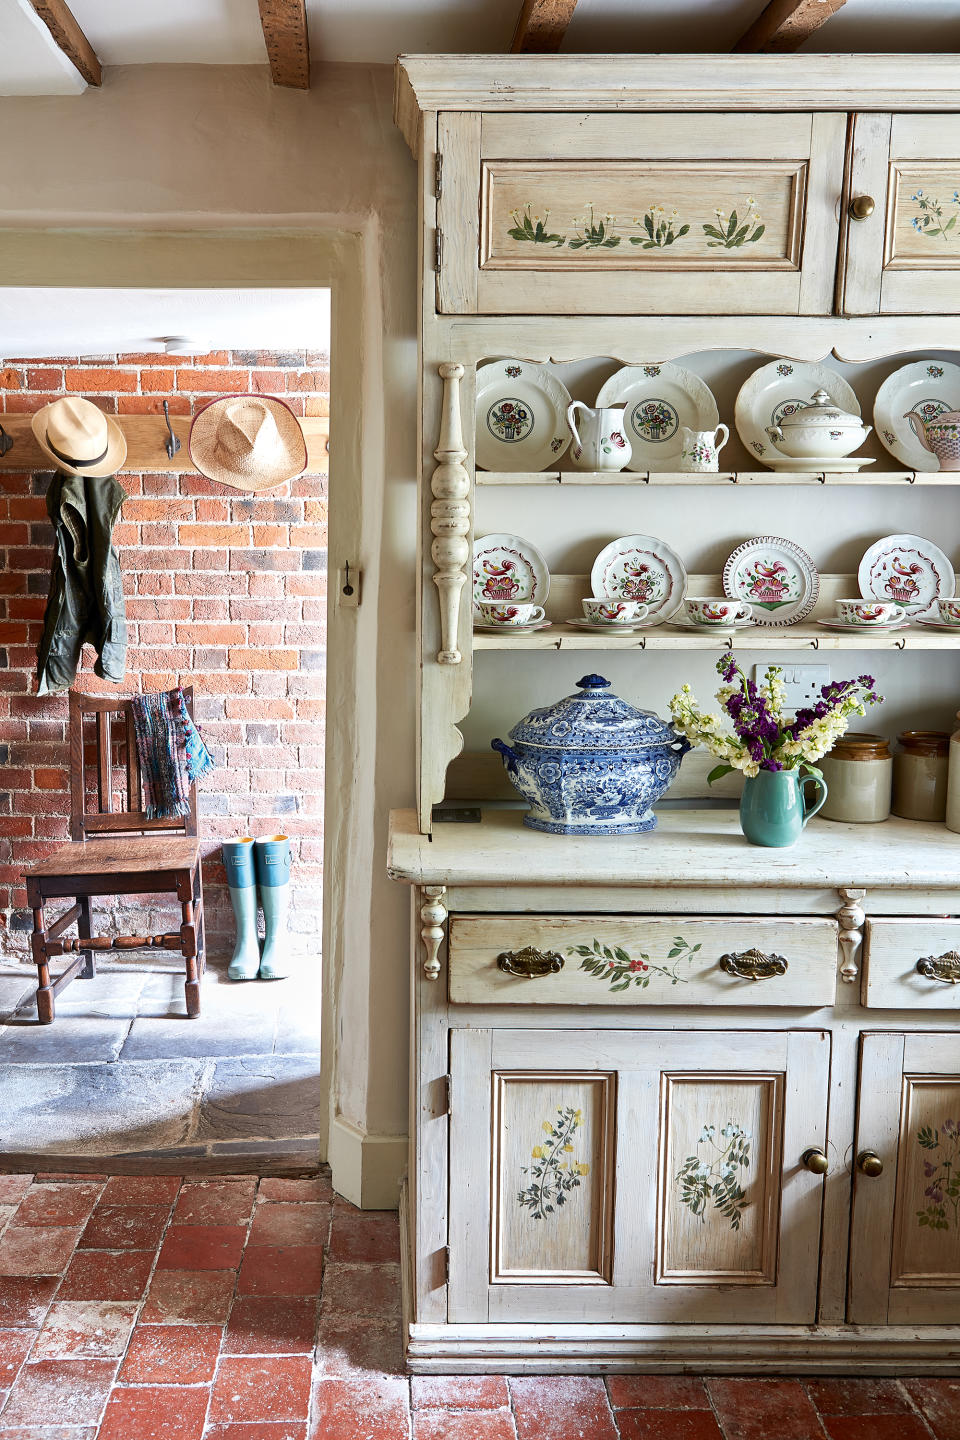 3. ADD BRING RUSTIC CHARM WITH AN ANTIQUE PAINTED PIECE